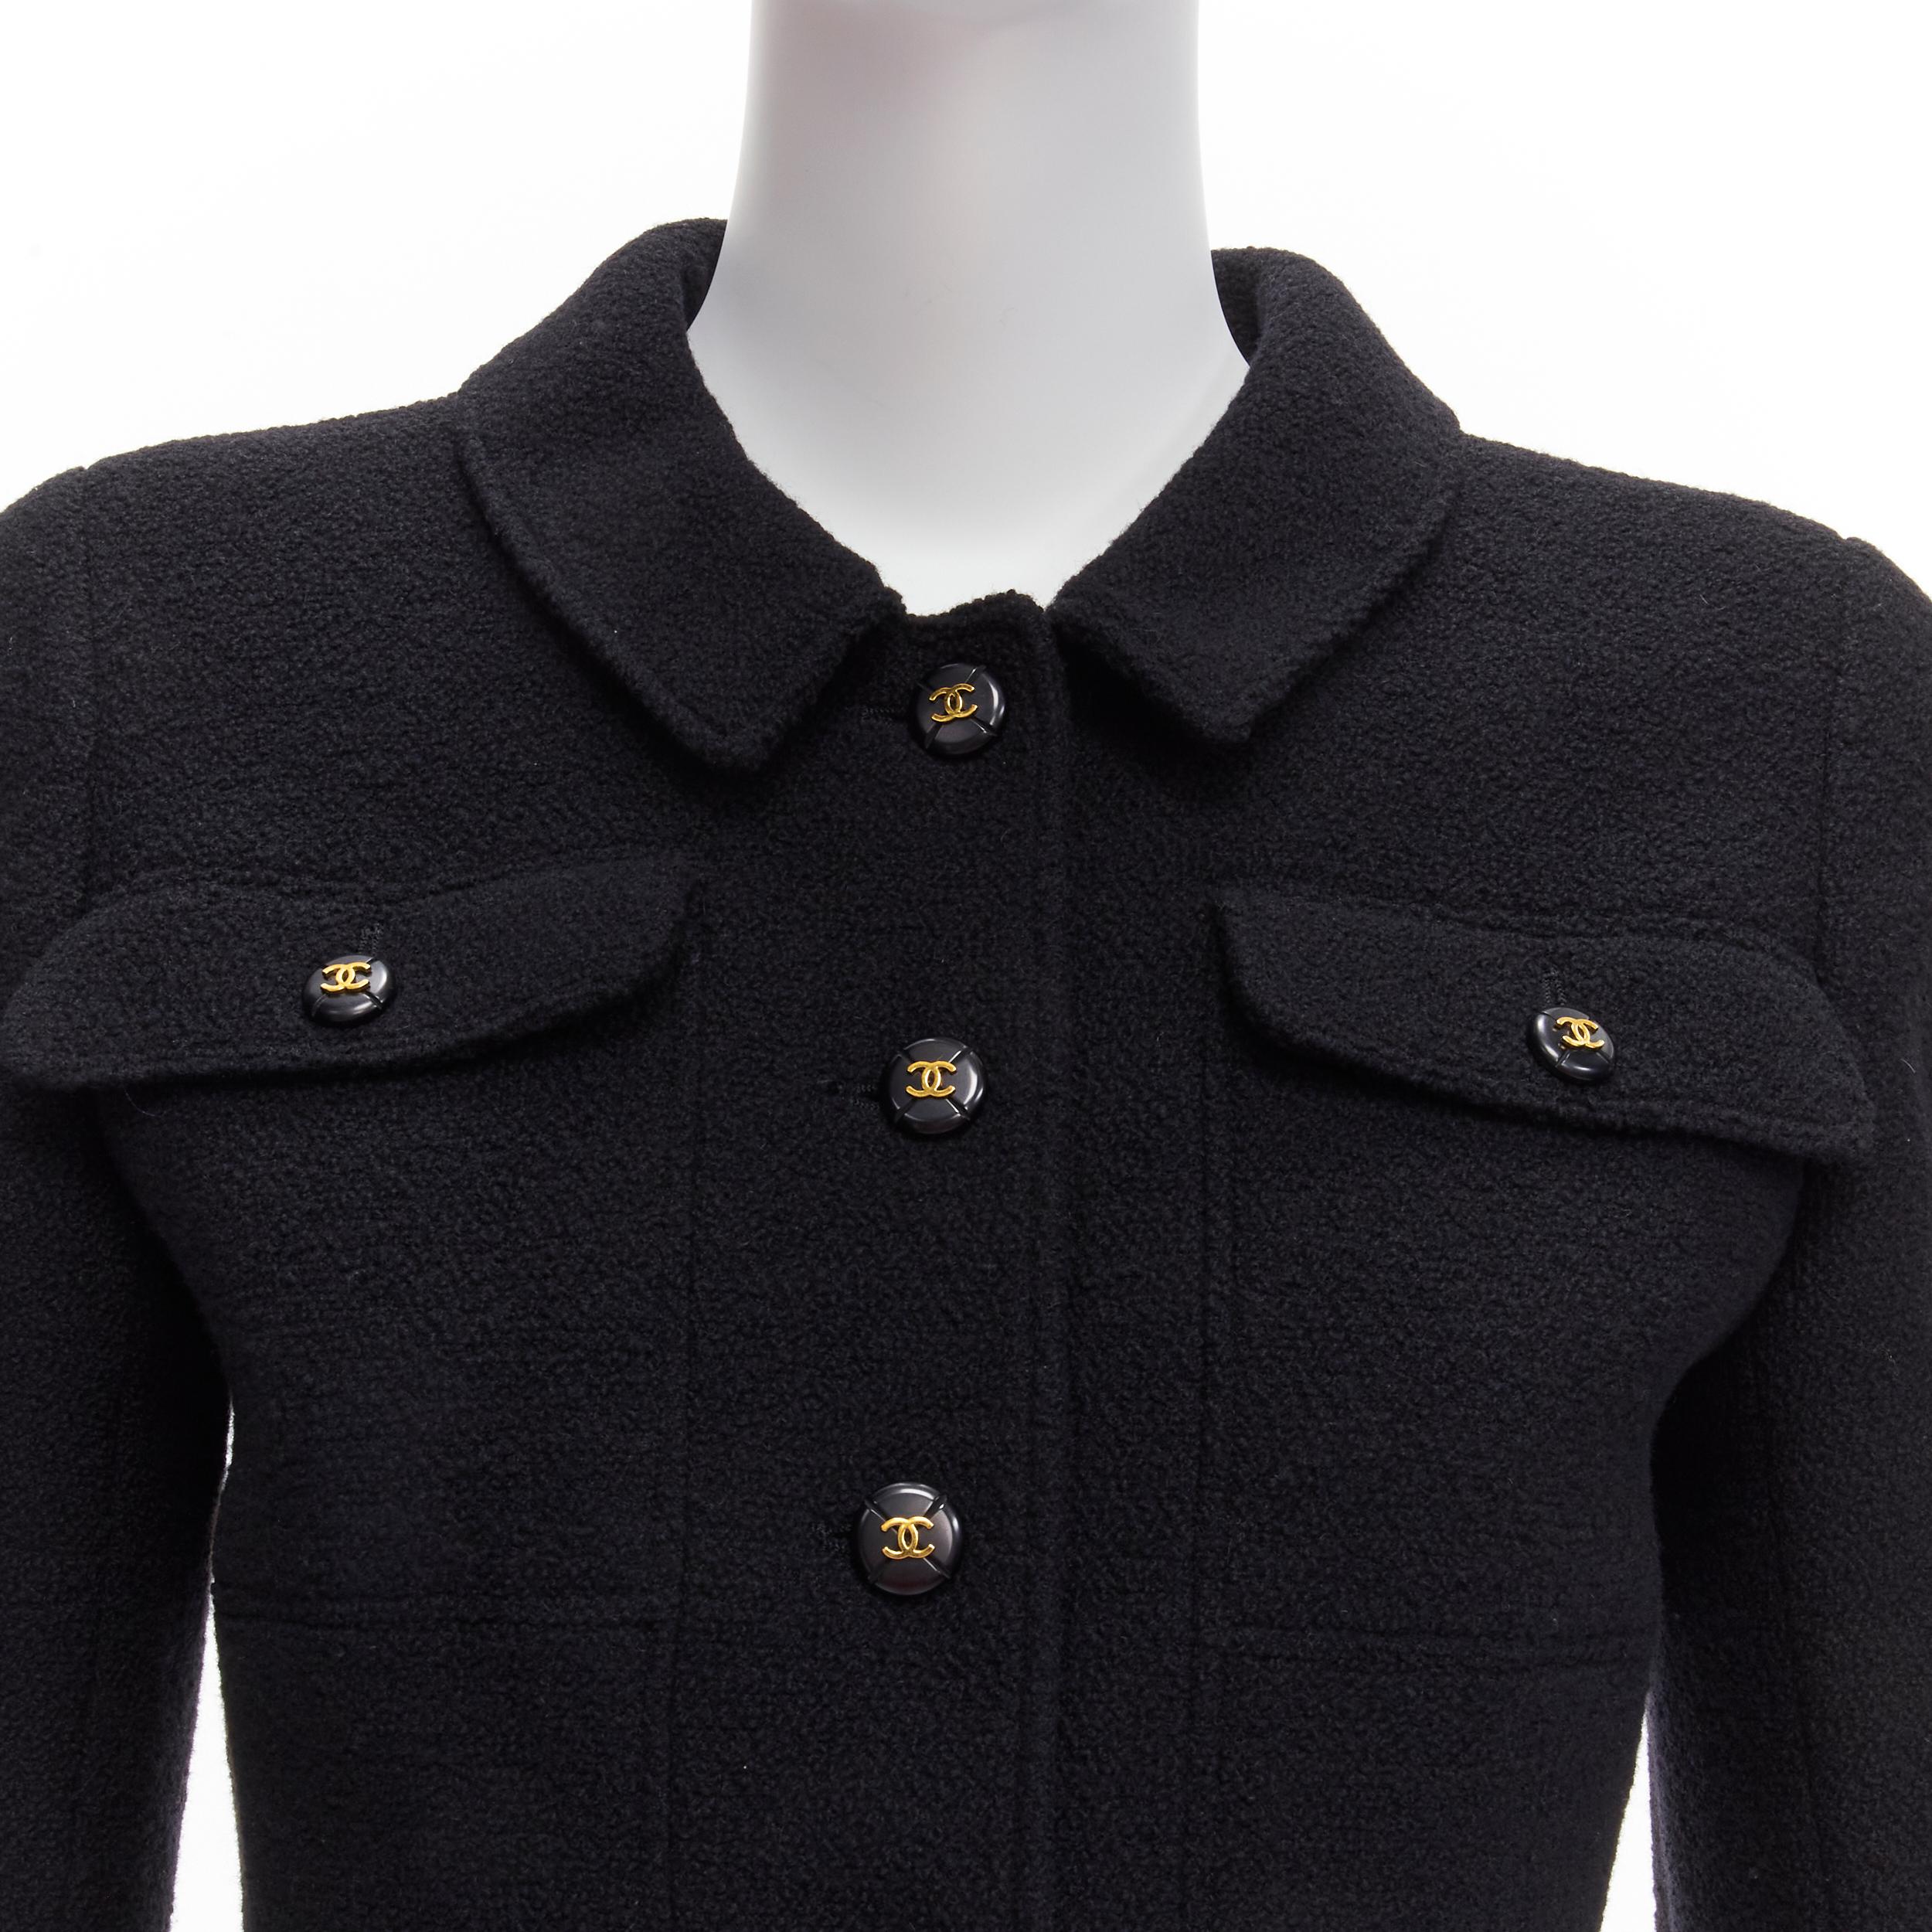 CHANEL 95P black wool crepe gold CC button 4 pocket cropped jacket top 5